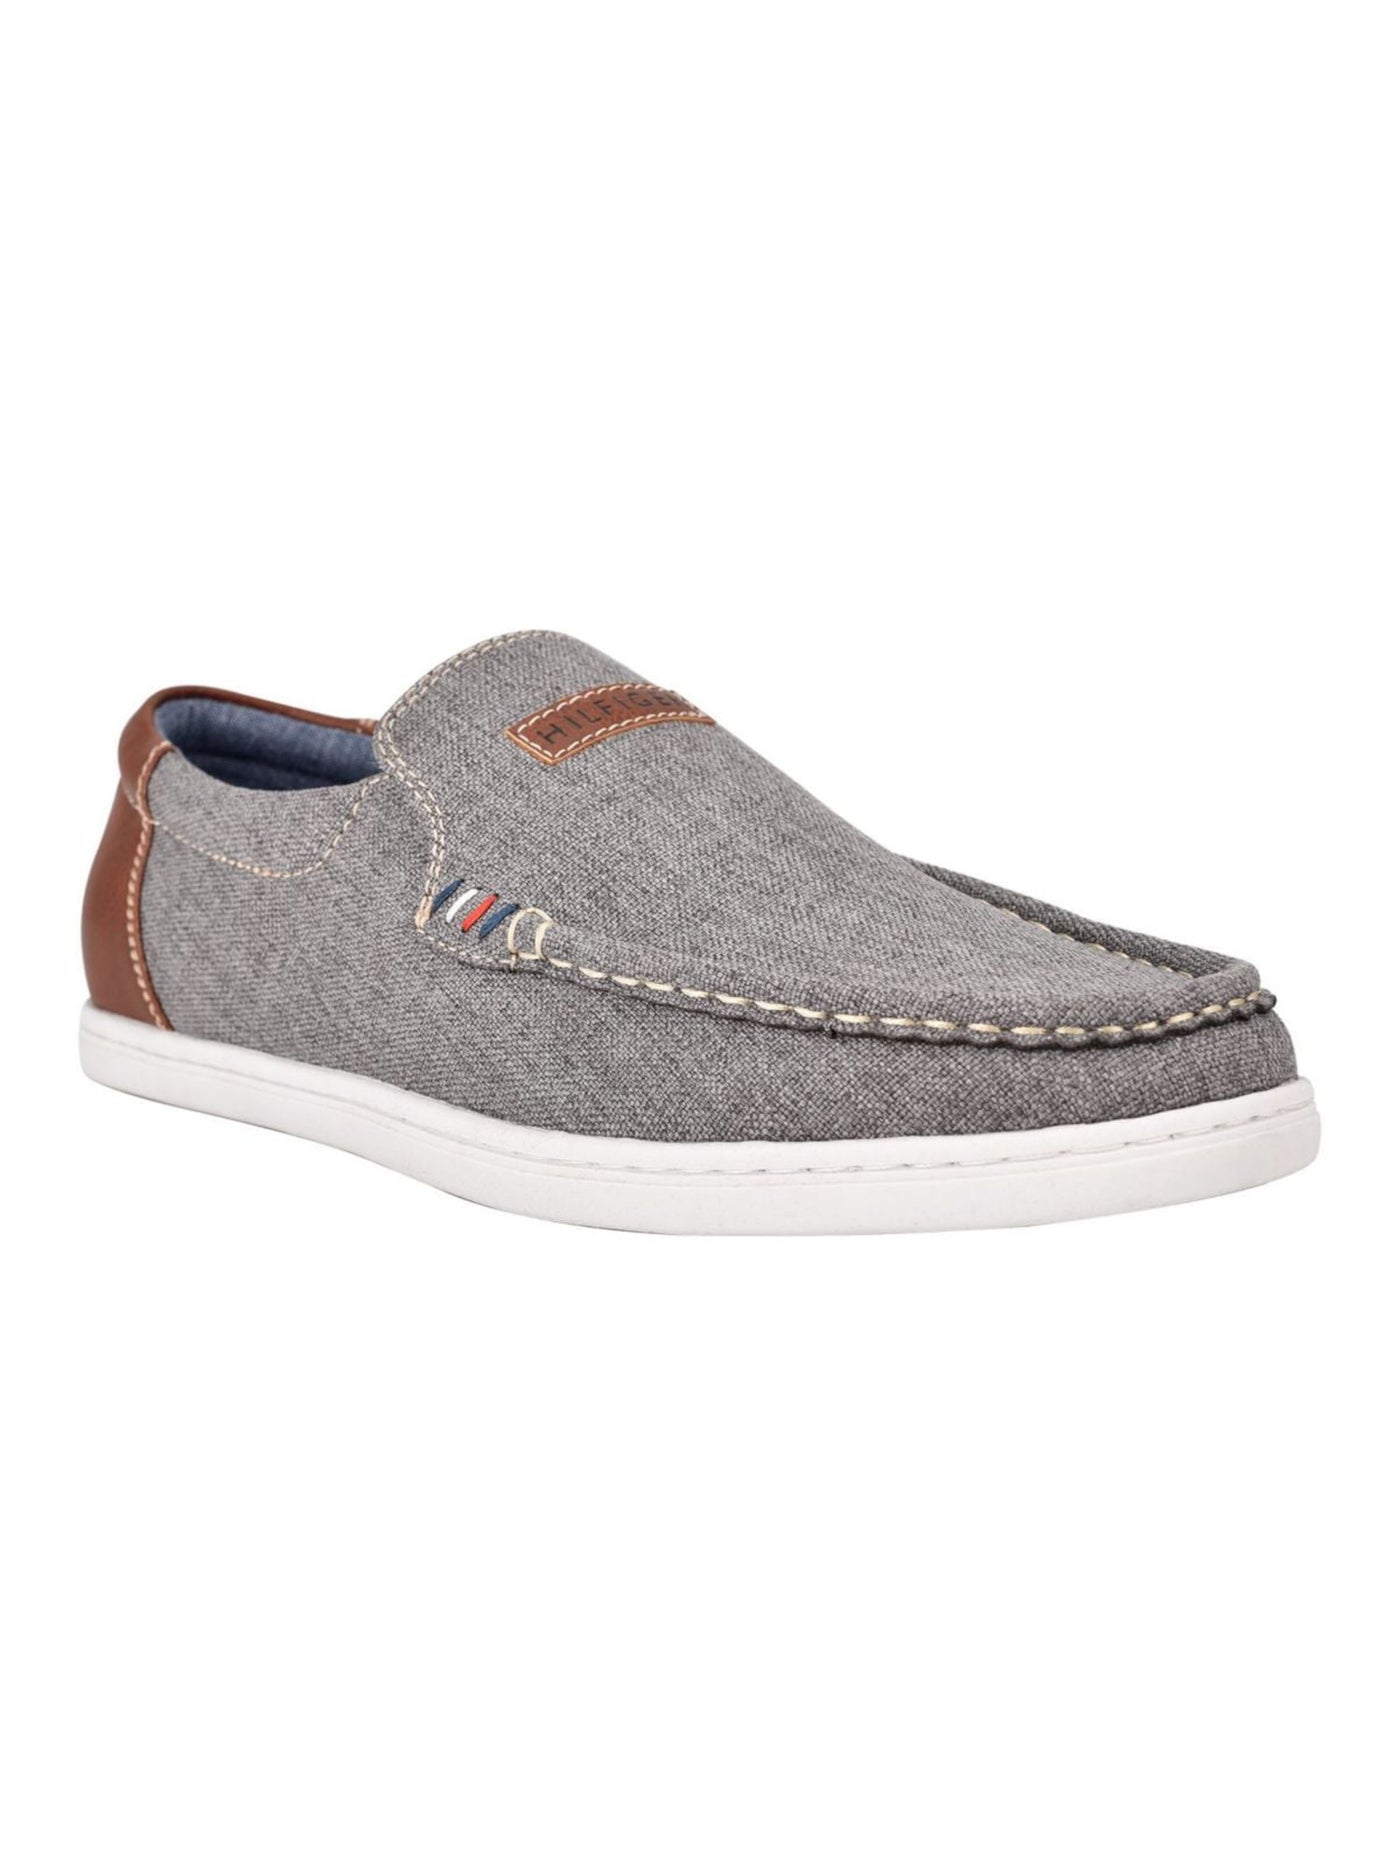 TOMMY HILFIGER Mens Gray Linen Cushioned Stretch Carlid Round Toe Slip On Sneakers Shoes 8